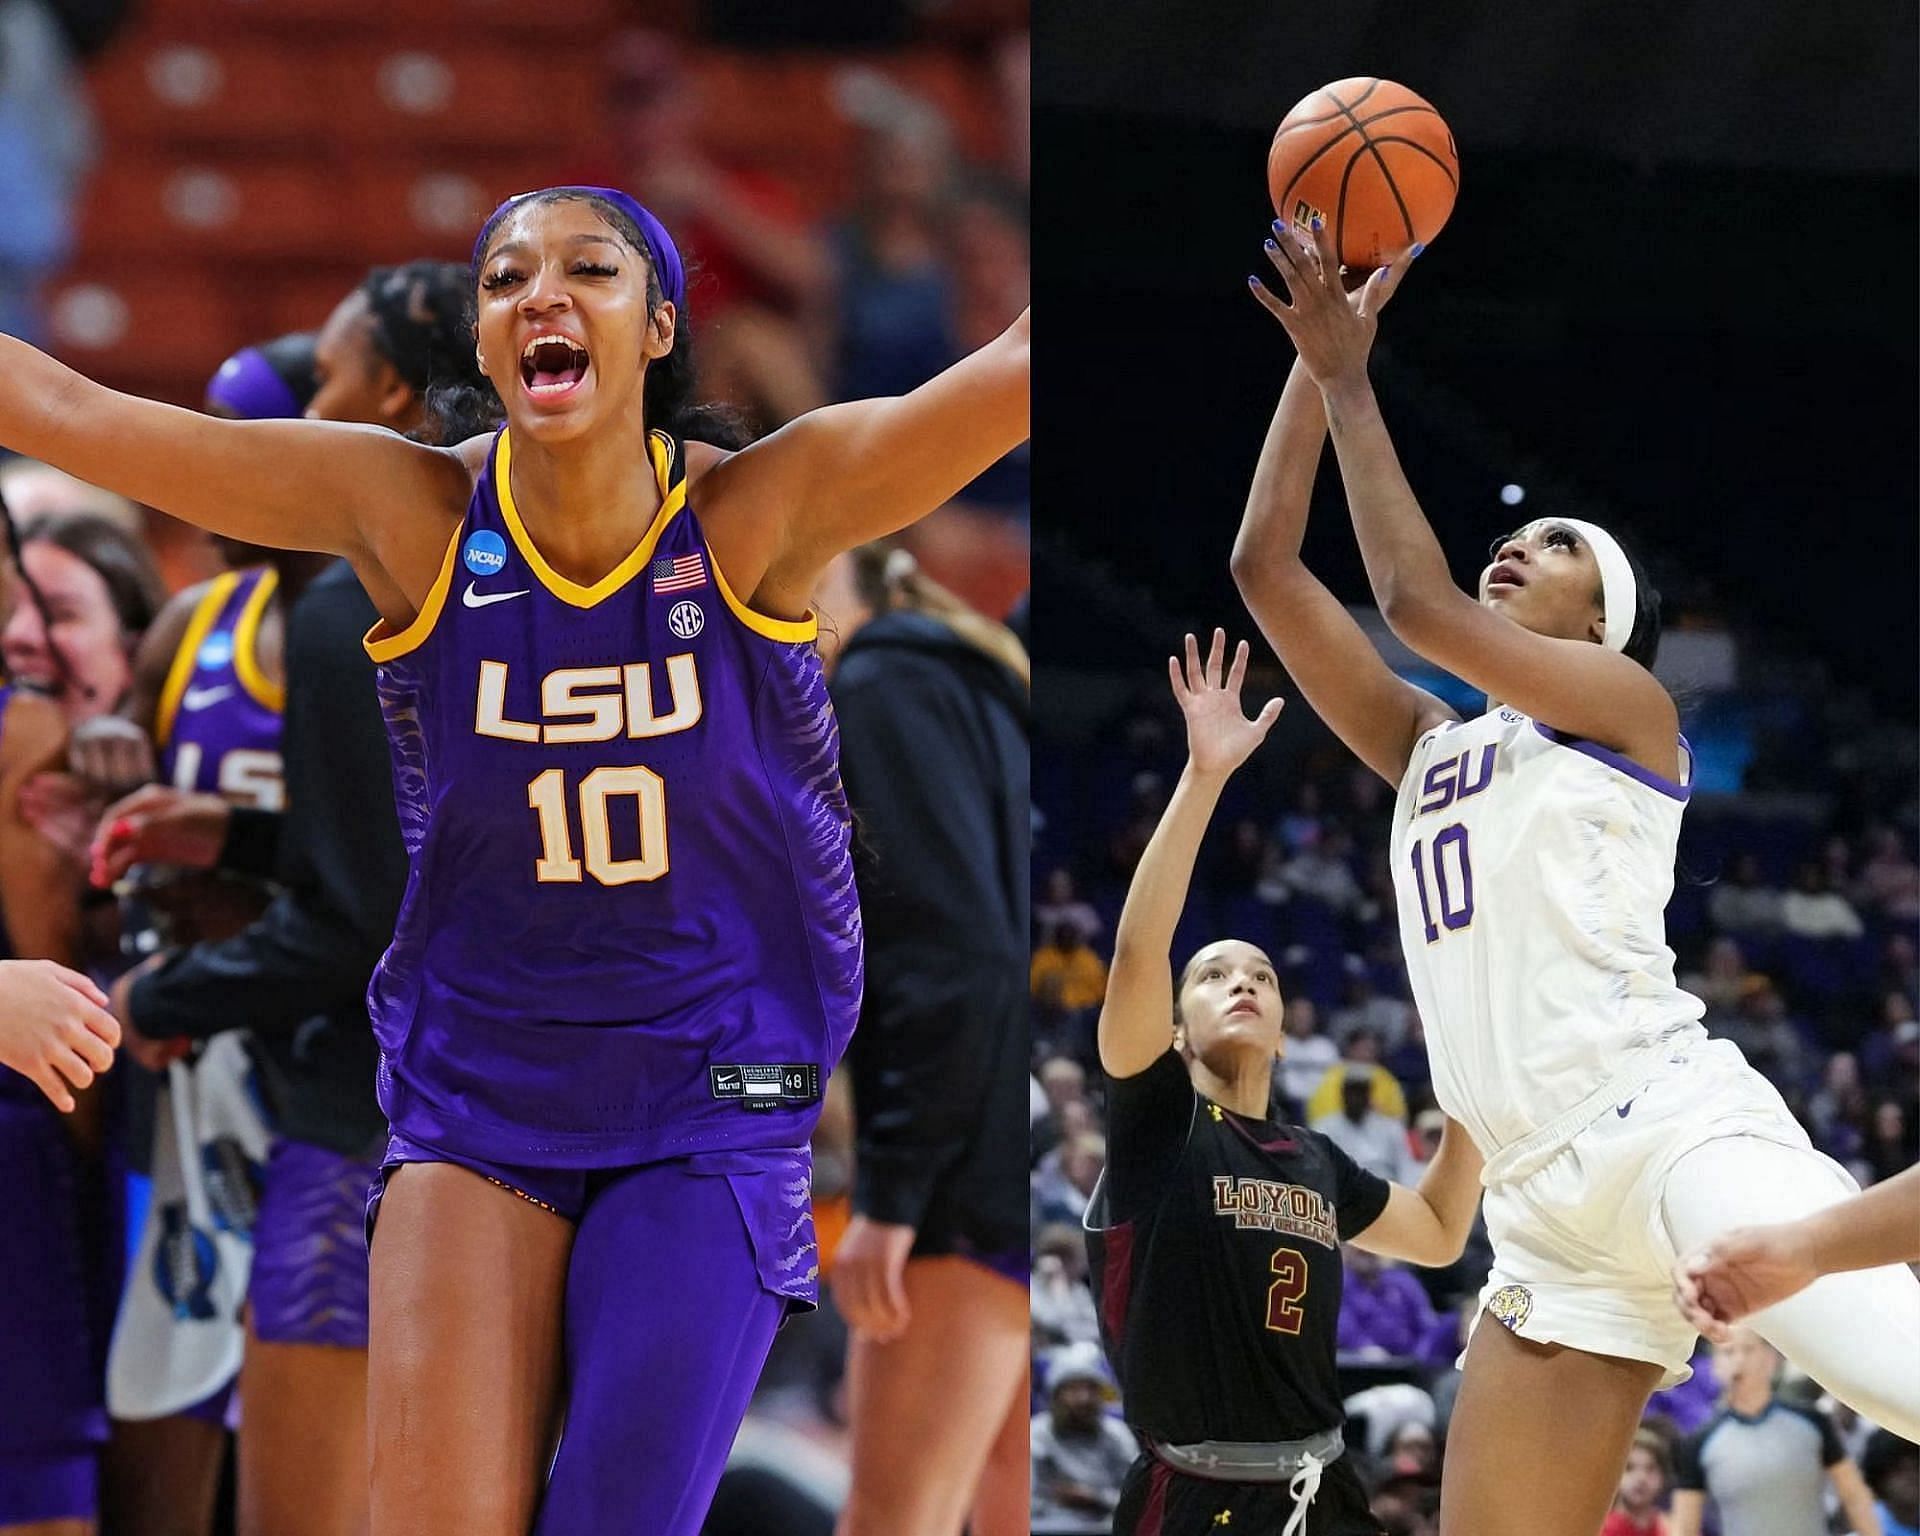 Angel Reese on Making LSU History, the Public Eye and Her Future